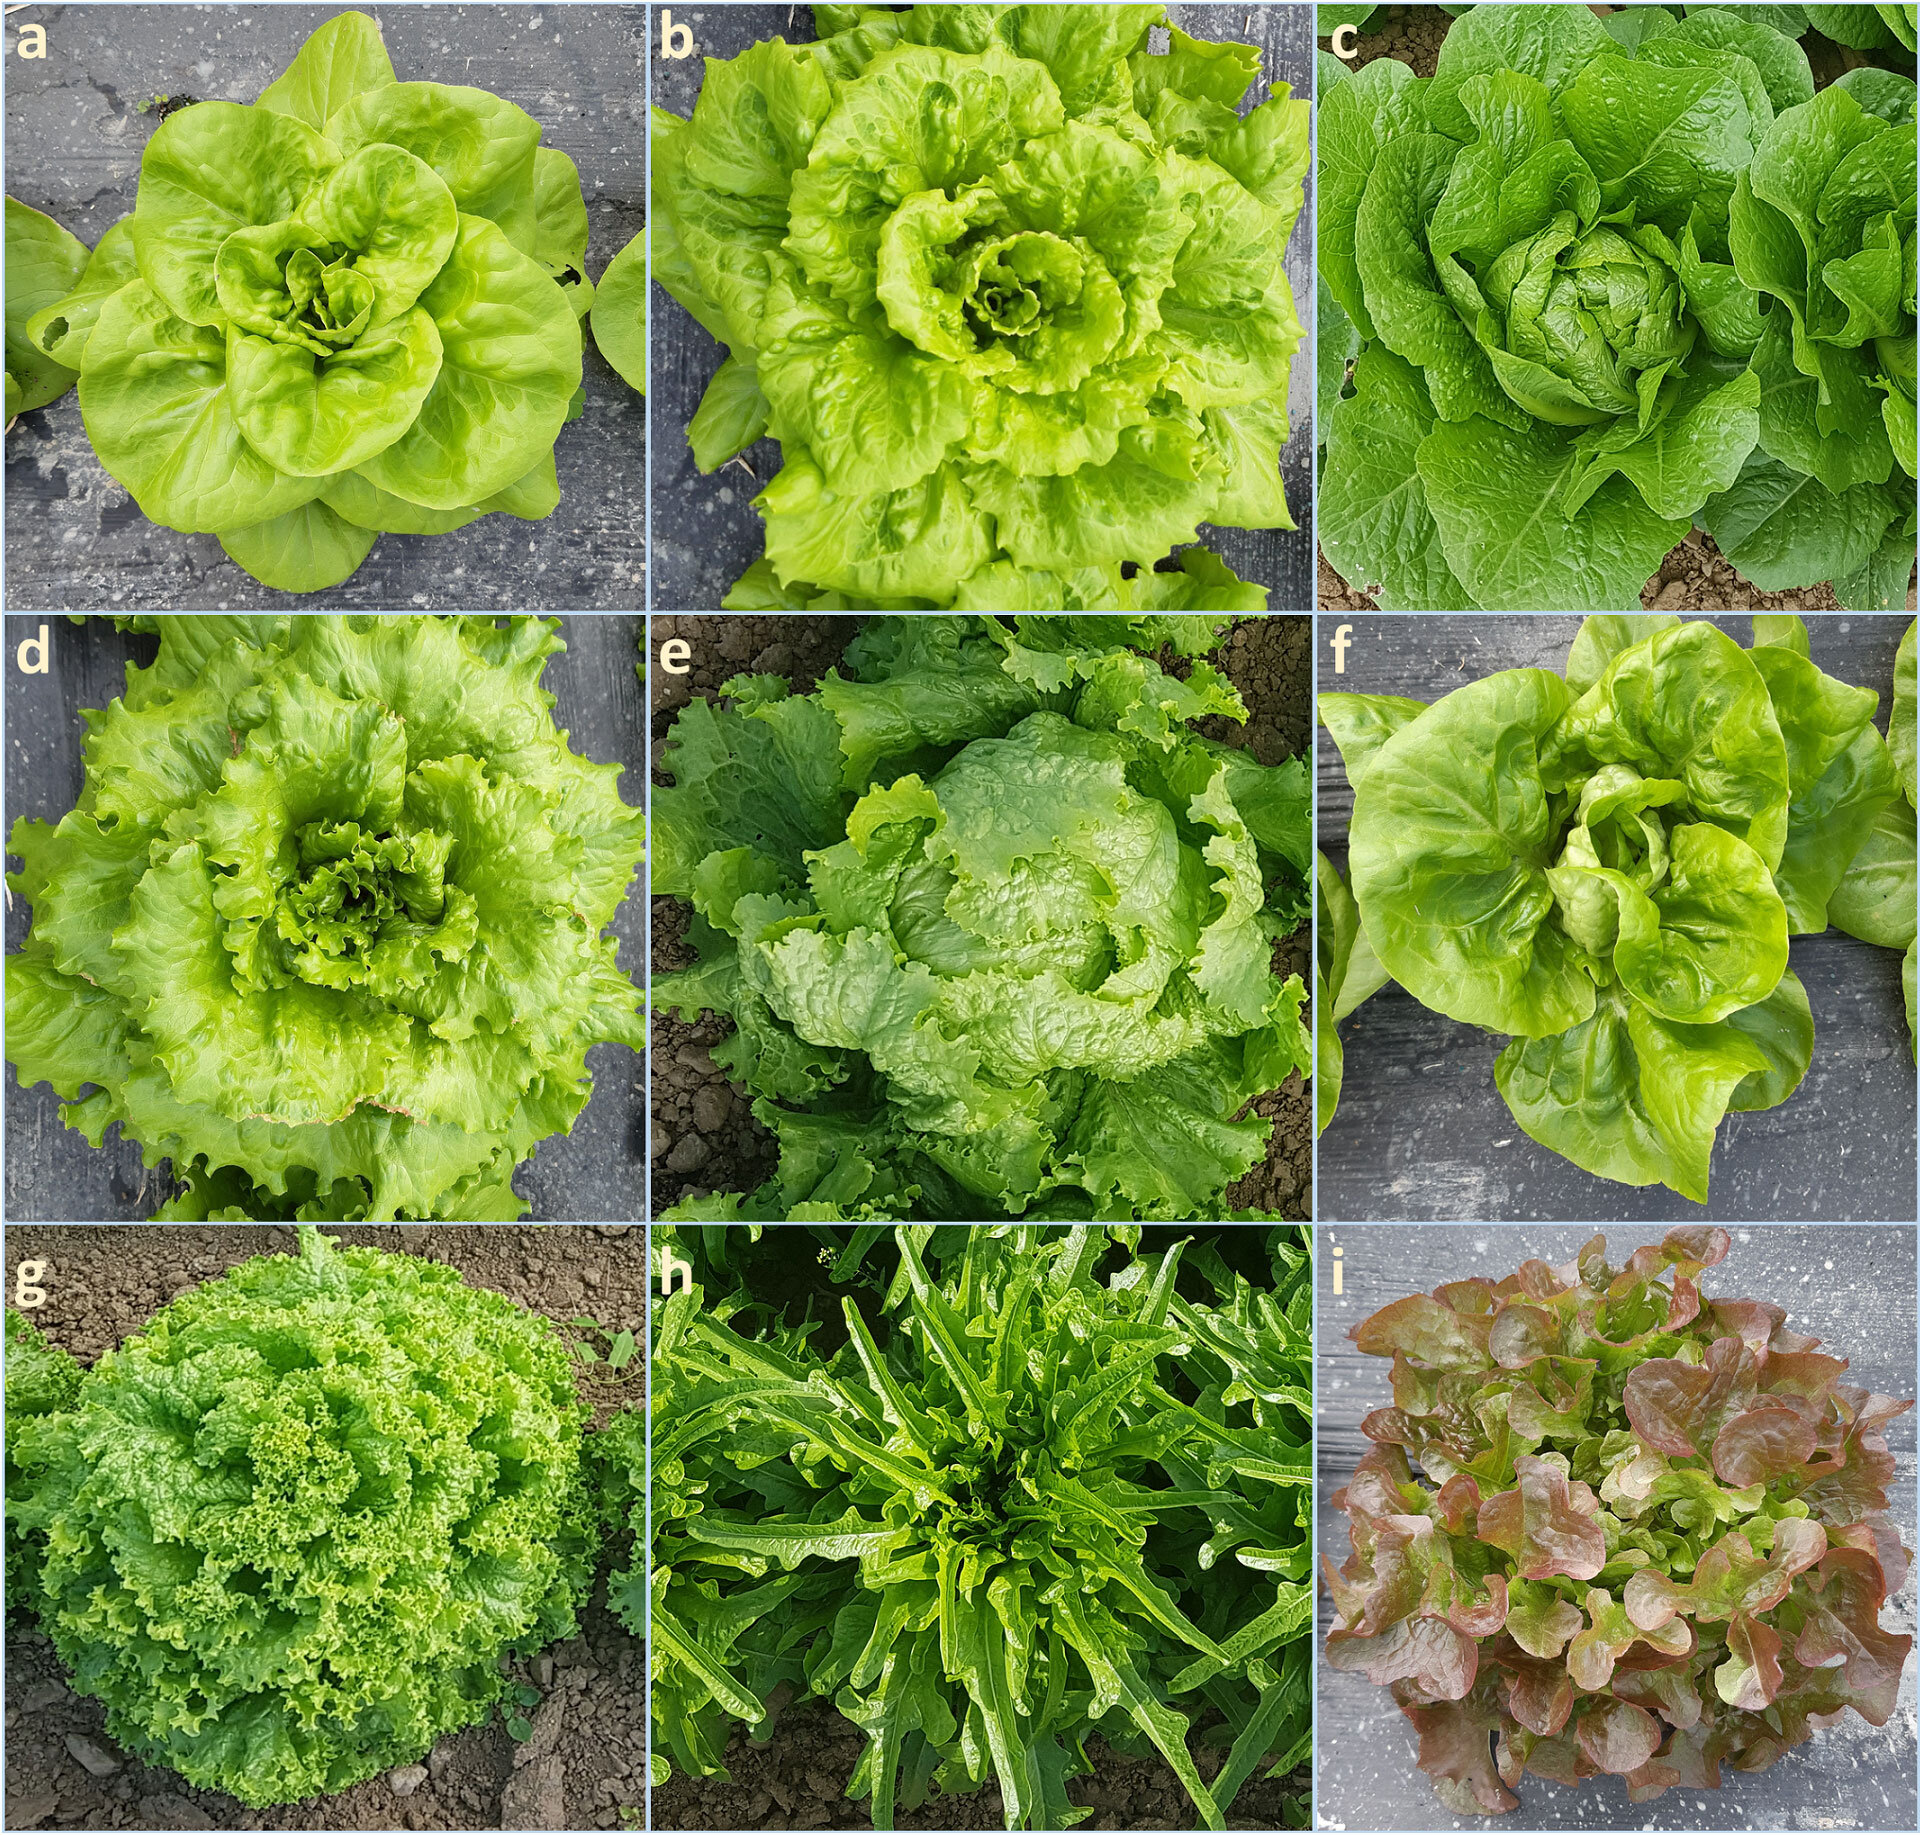 A brand new genomic useful resource to analyze the variety of lettuce germplasm